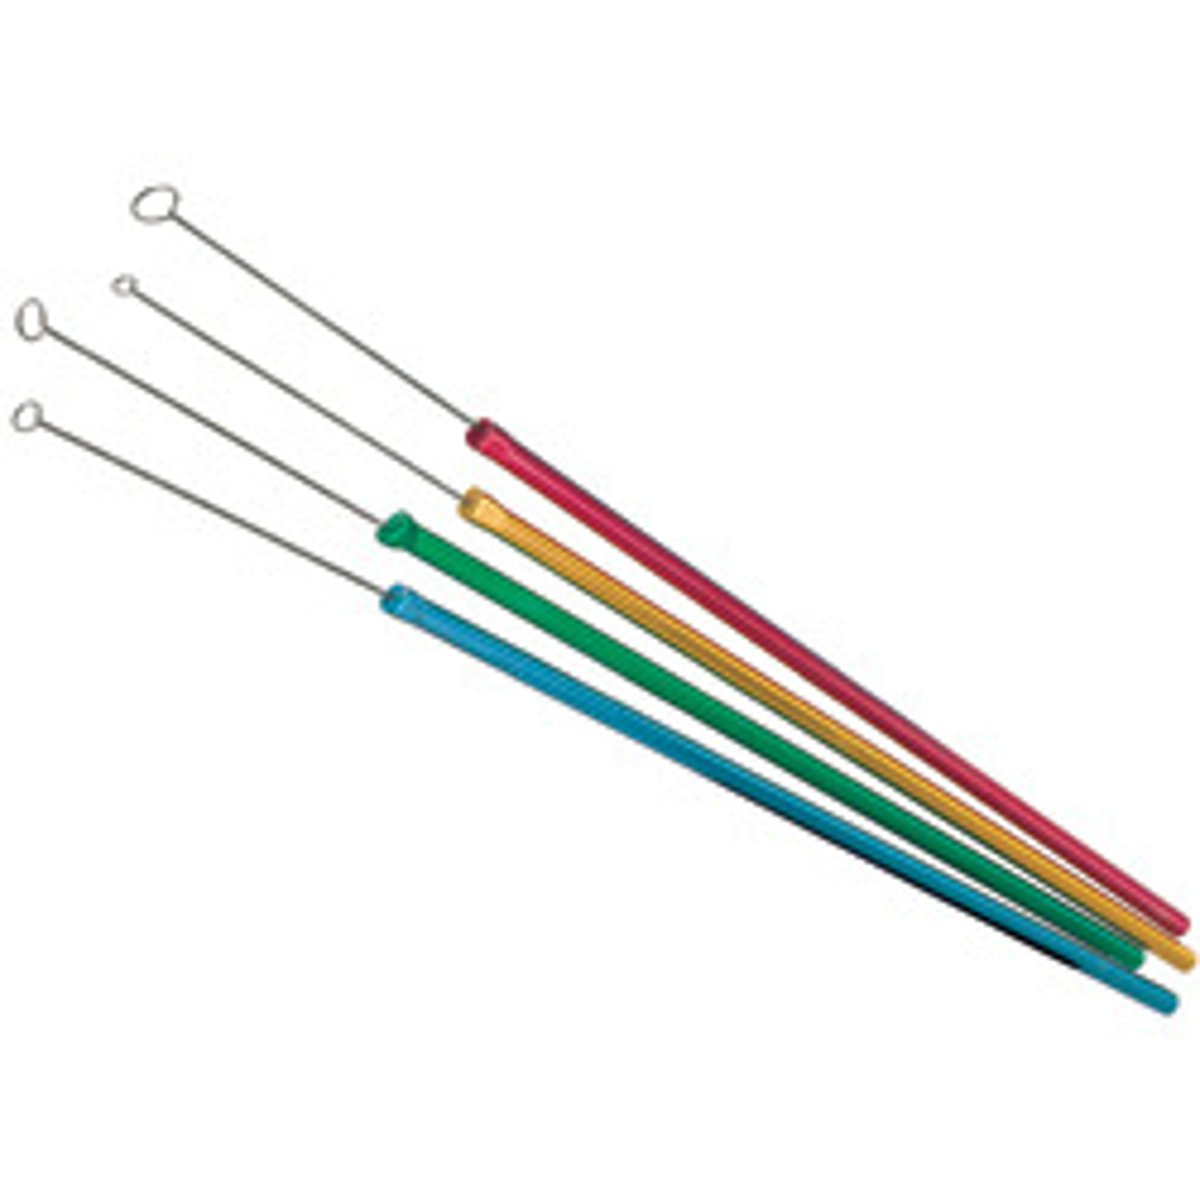 <p>a metal rod with a small wire loop at the end, used as a swab</p>